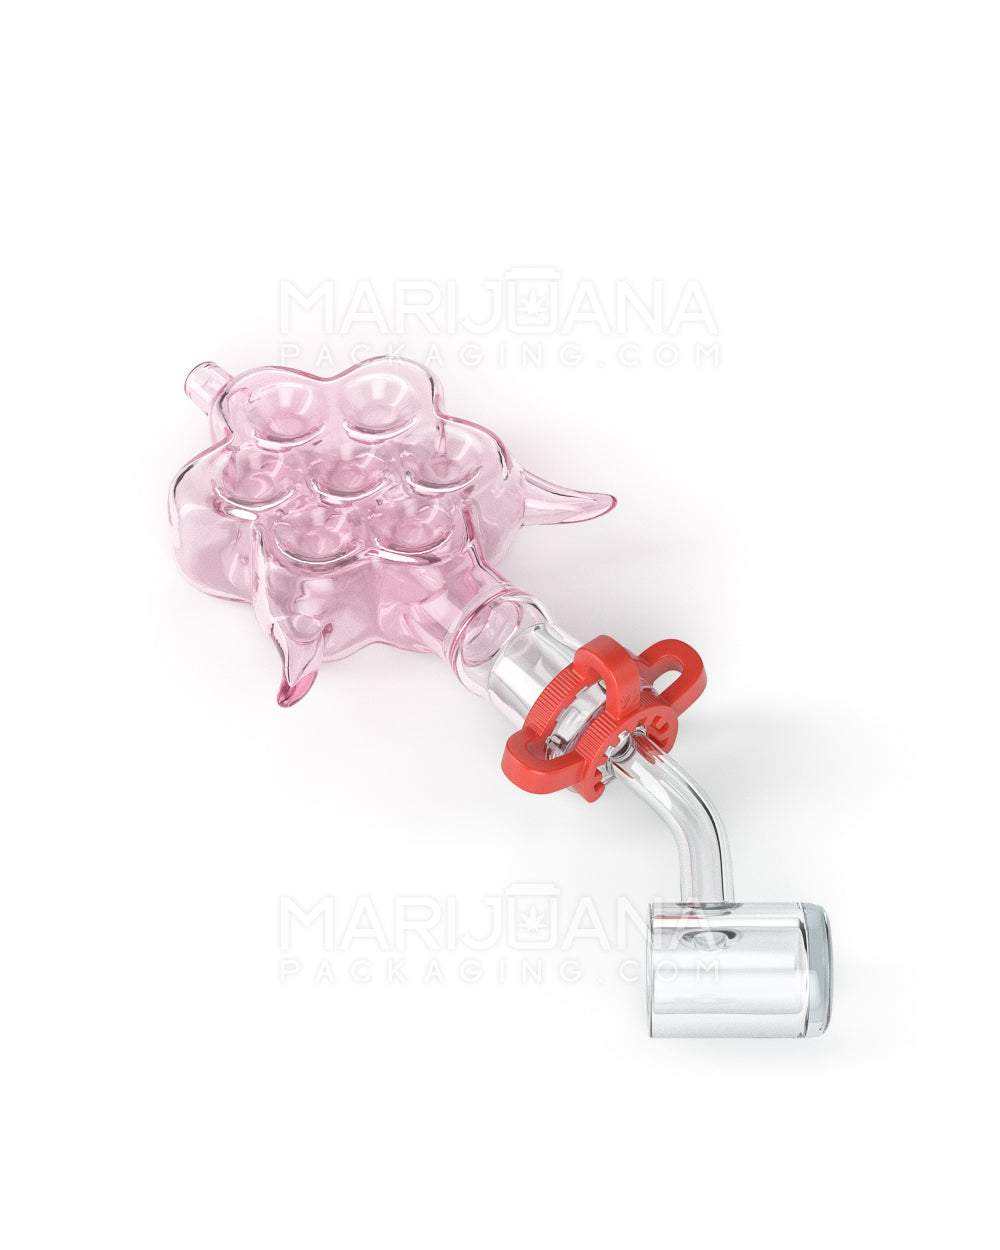 Horned Honeycomb Glass Nectar Collector w/ Banger Nail | 4in Long - 14mm Attachment - Pink - 5